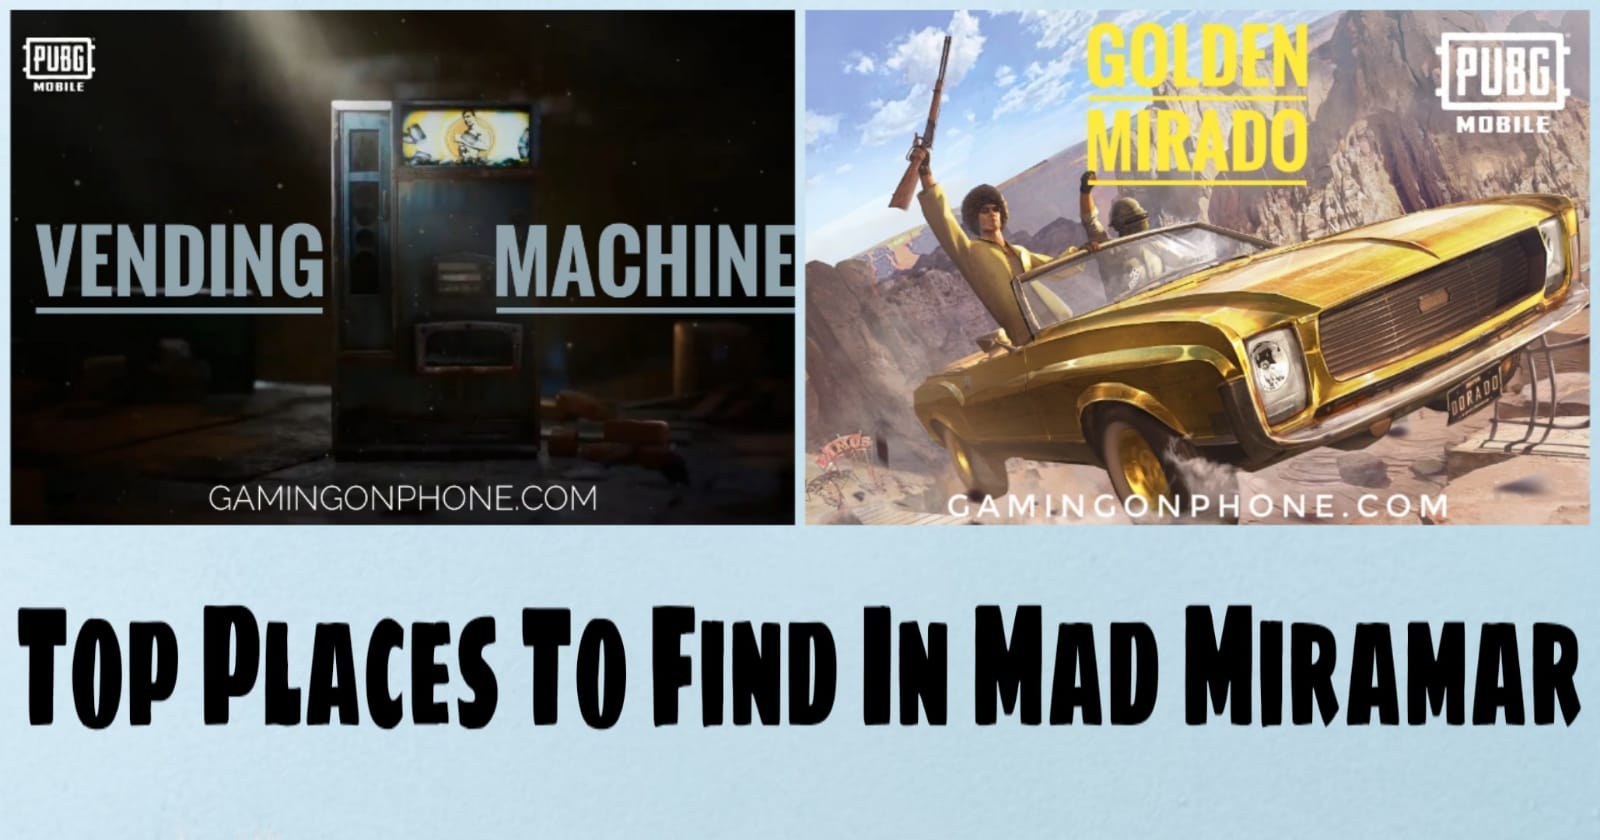 Pubg Mobile Top Locations To Find Vending Machines And Golden Mirado